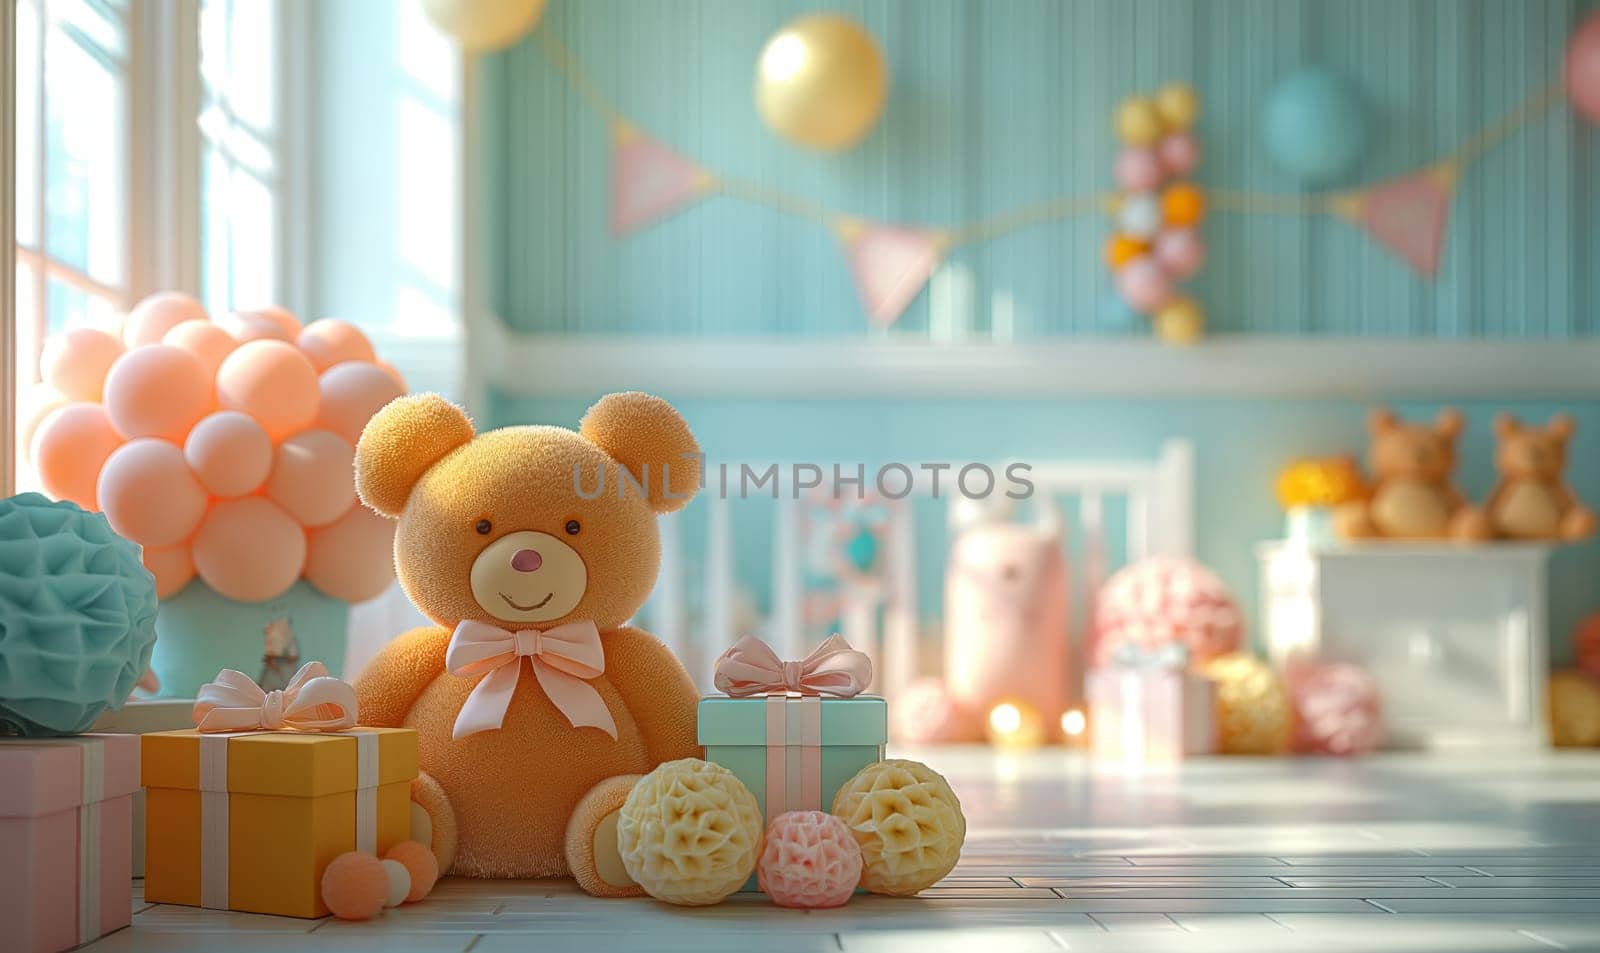 Illustration of a teddy bear with balloons in the room. by Fischeron